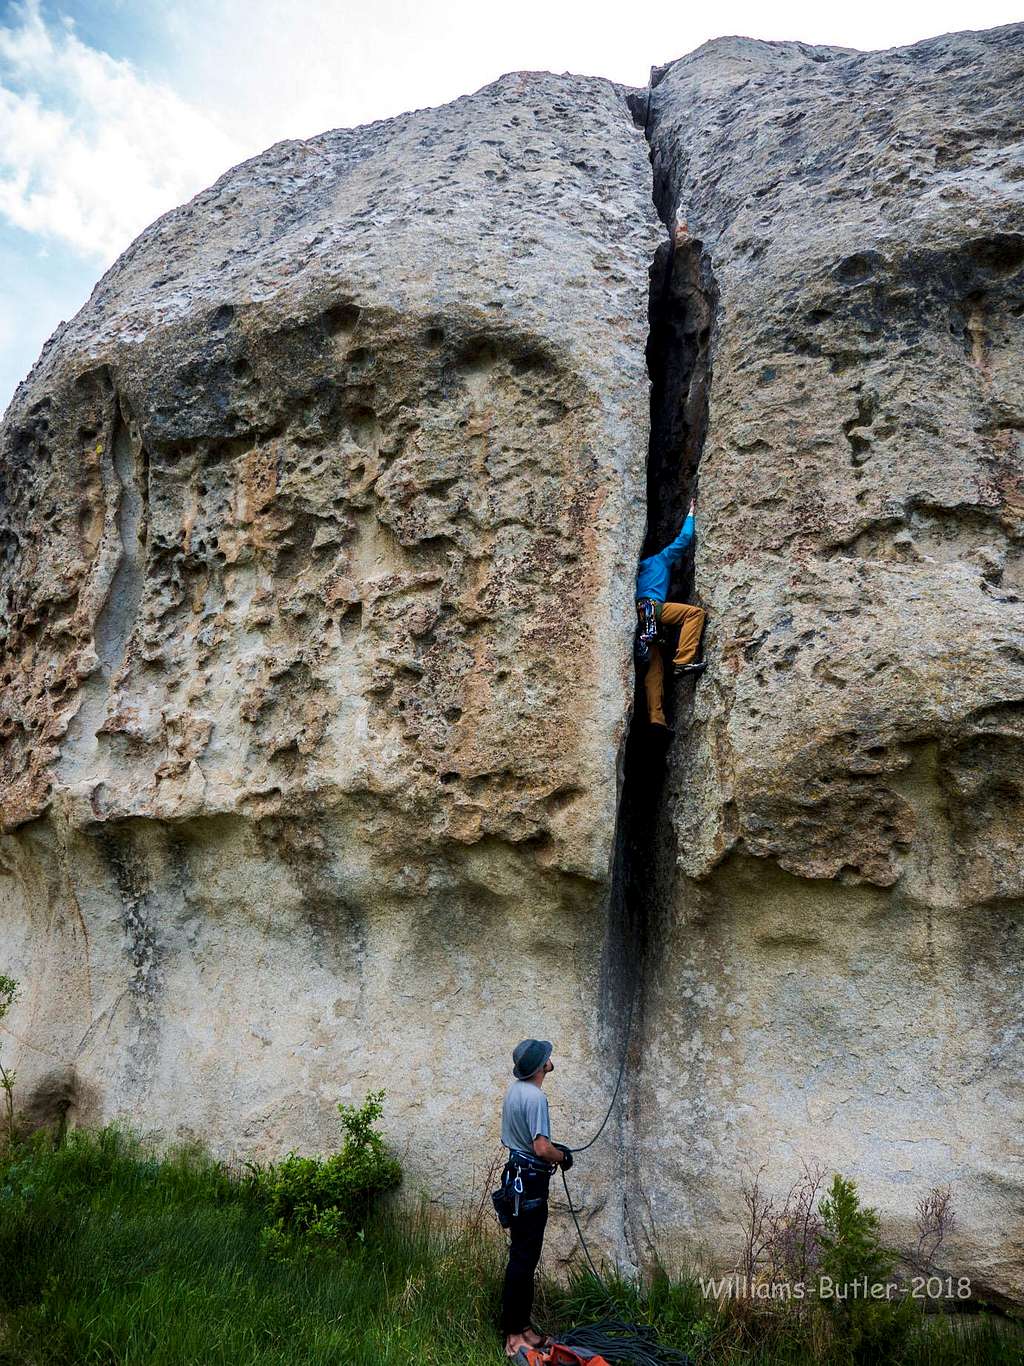 Dow leading Water Groove, 5.10R*